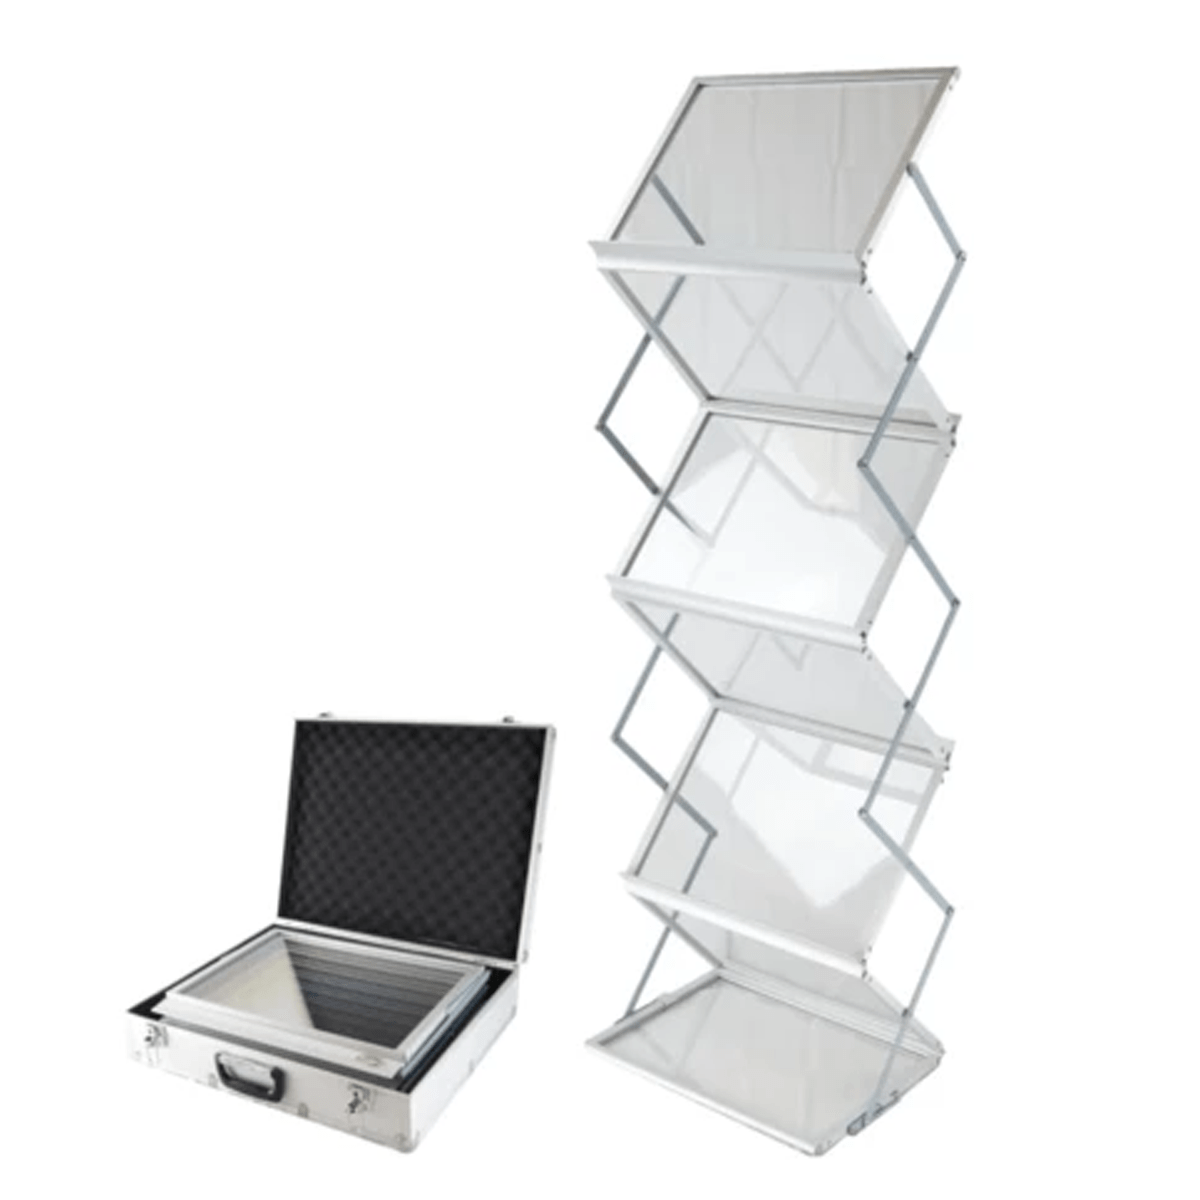 Zigzag Brochure Stand A3 Foldable Silver / White Without Box